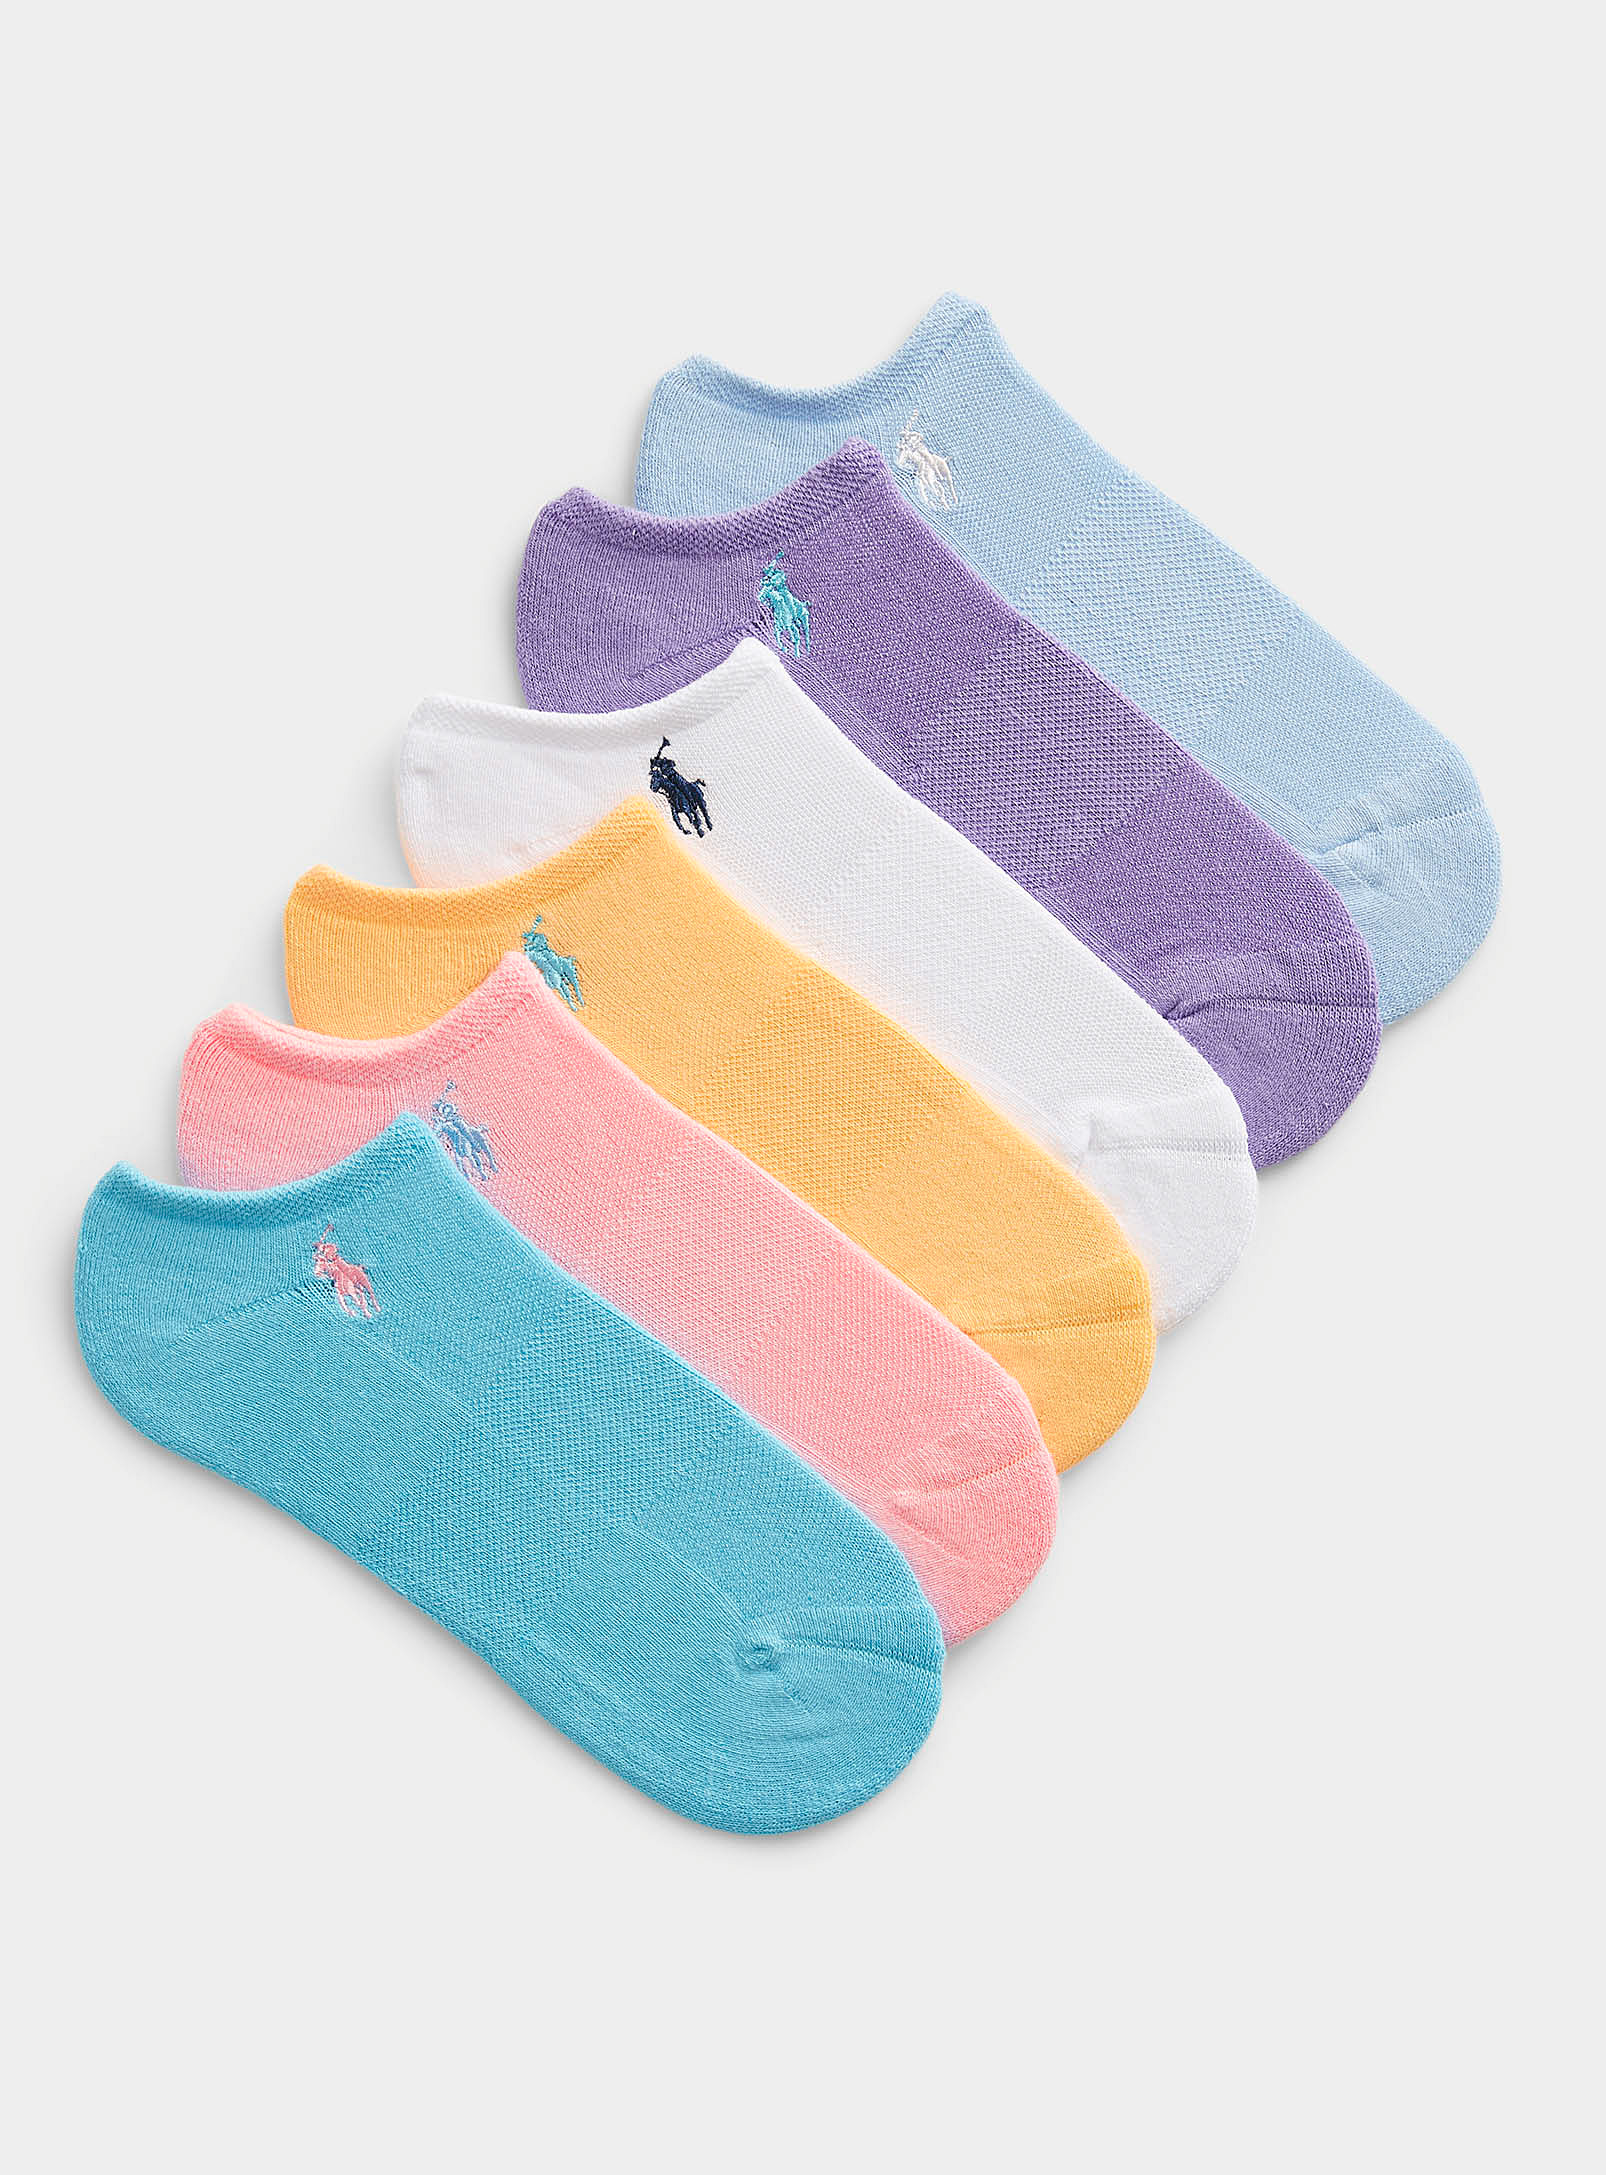 Polo Ralph Lauren Embroidered Logo Pastel Ped Socks Set Of 6 Pairs In Multi